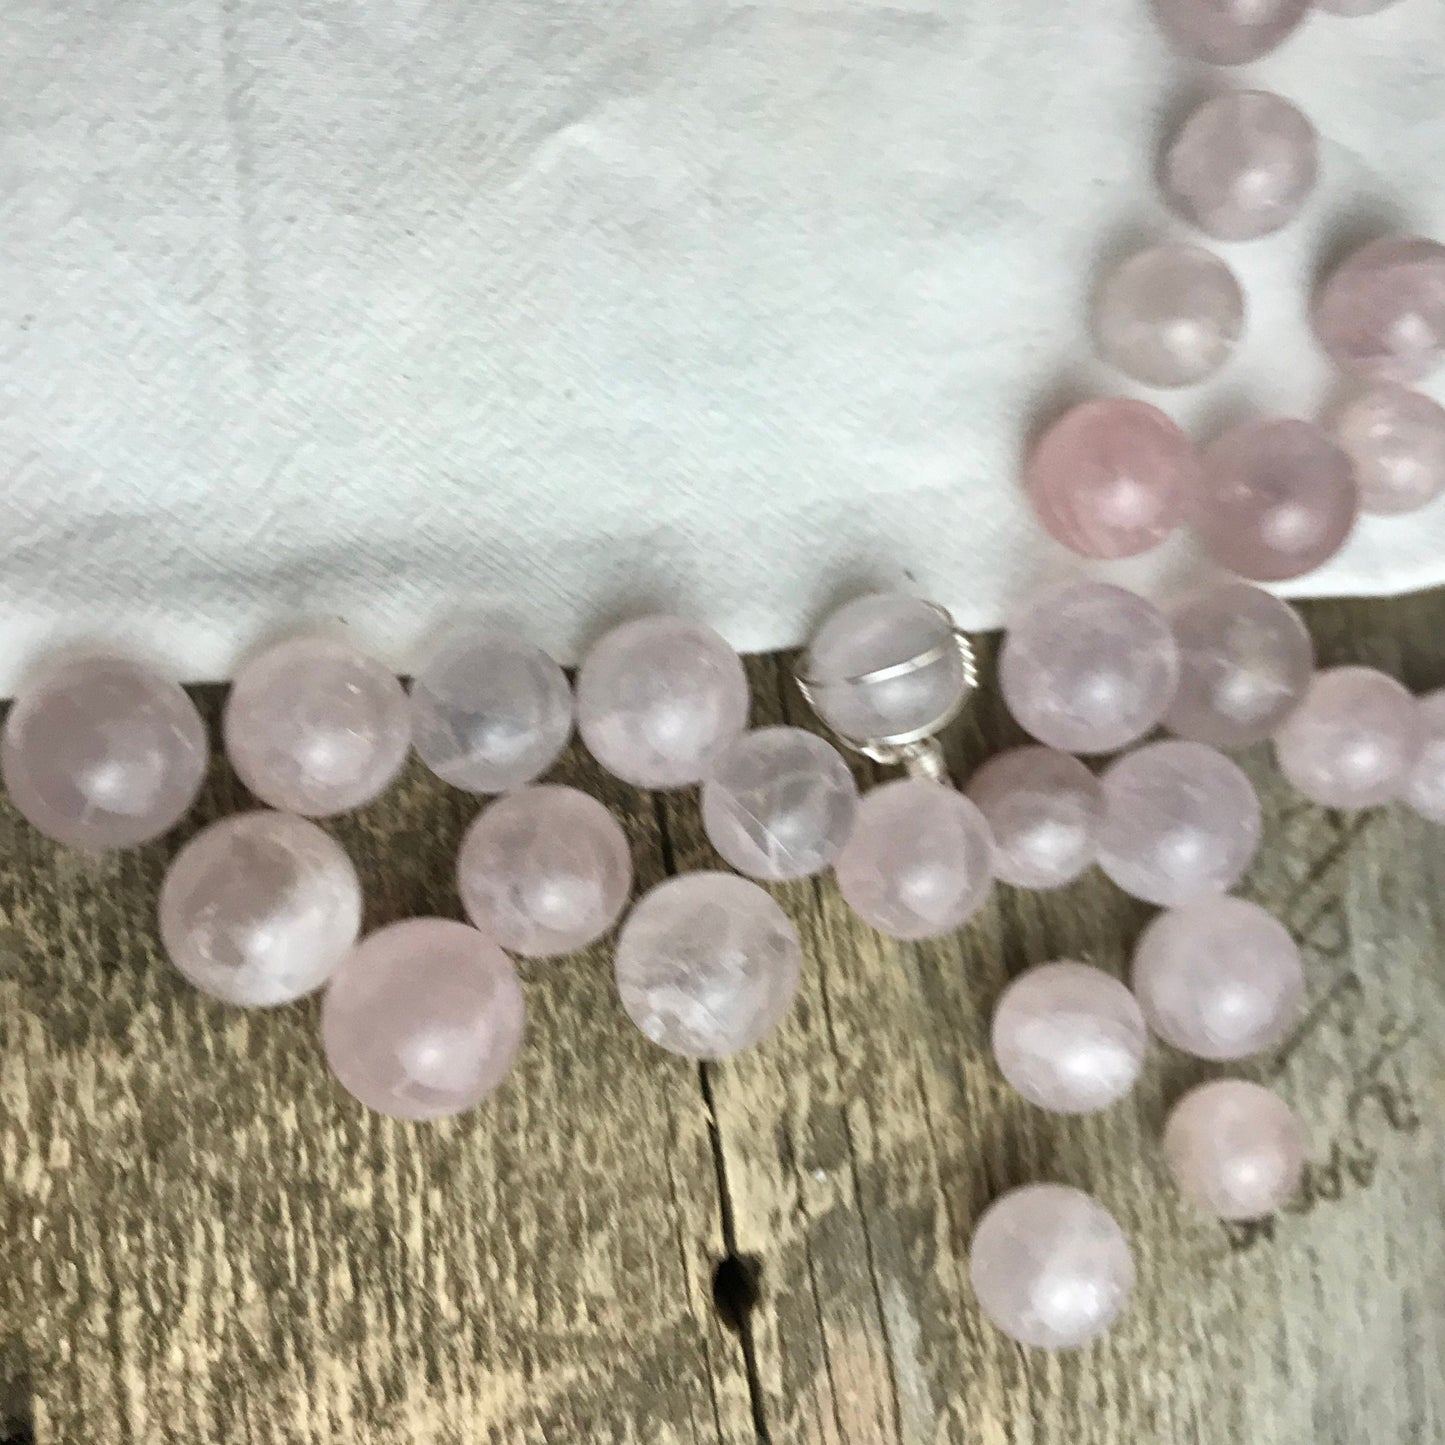 Rose Quartz, Polished Crystal Spheres (Approx. 1/2") Polished Stone for the Heart Chakra, for Wire Wrapping or Crystal Grid Supply 0316